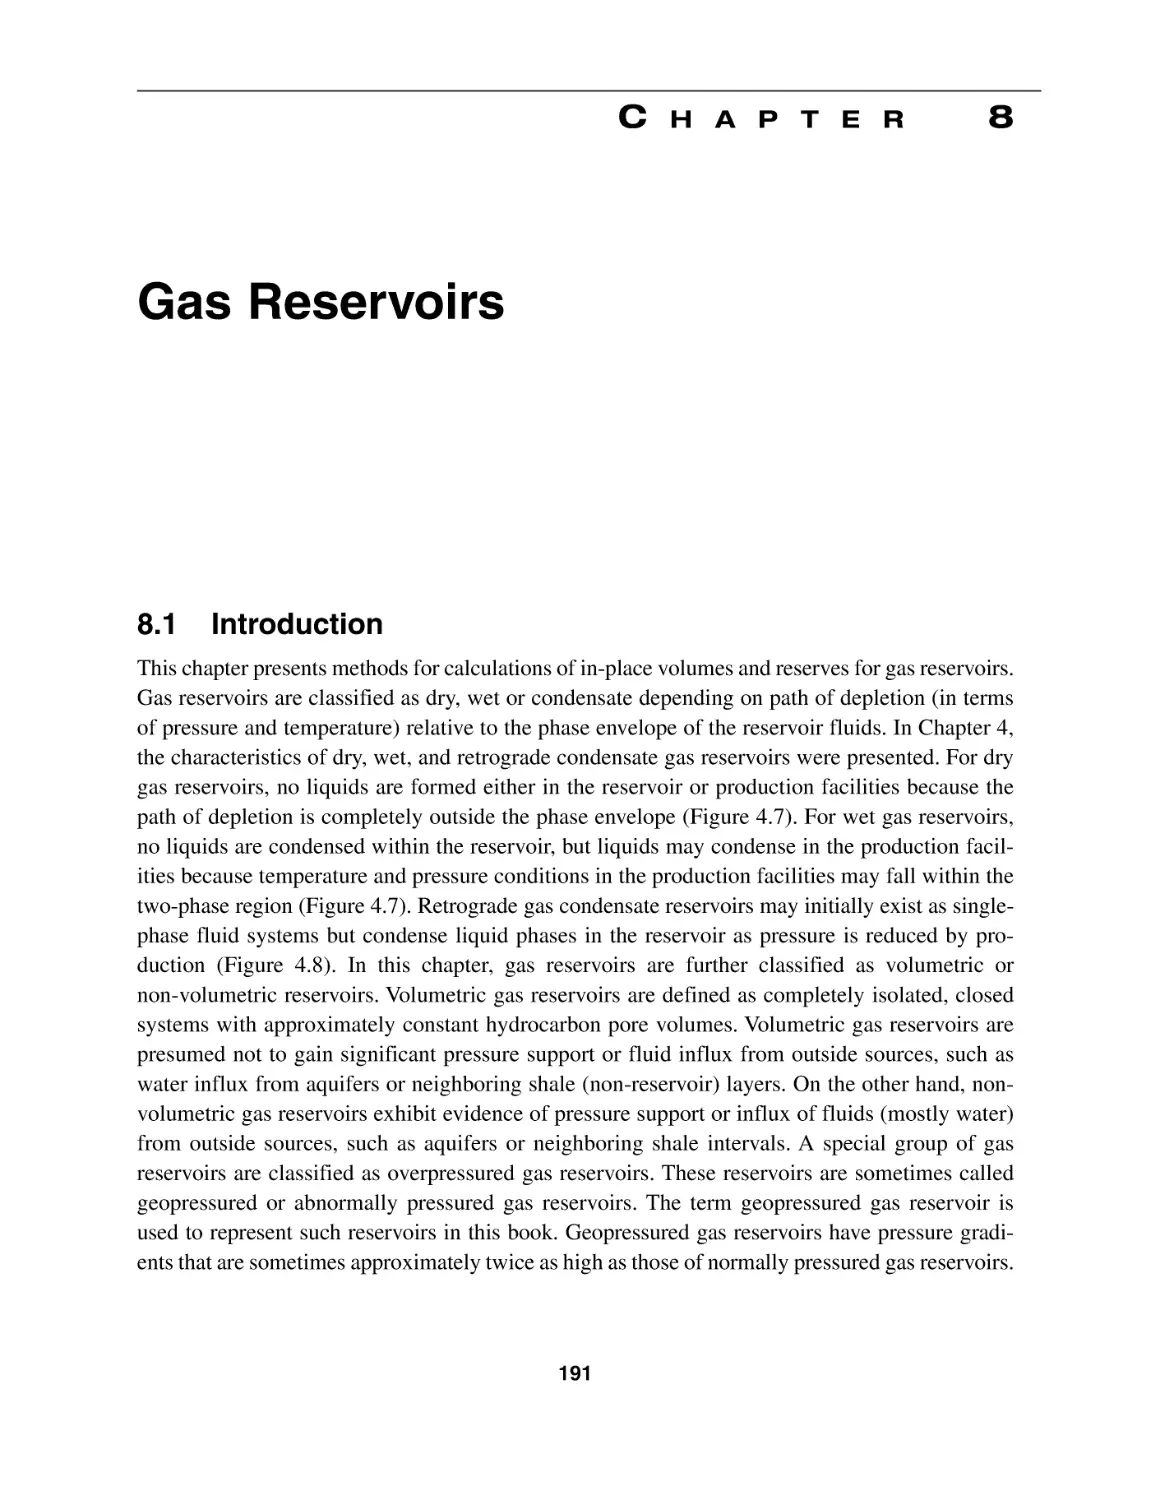 Chapter 8 Gas Reservoirs
8.1 Introduction